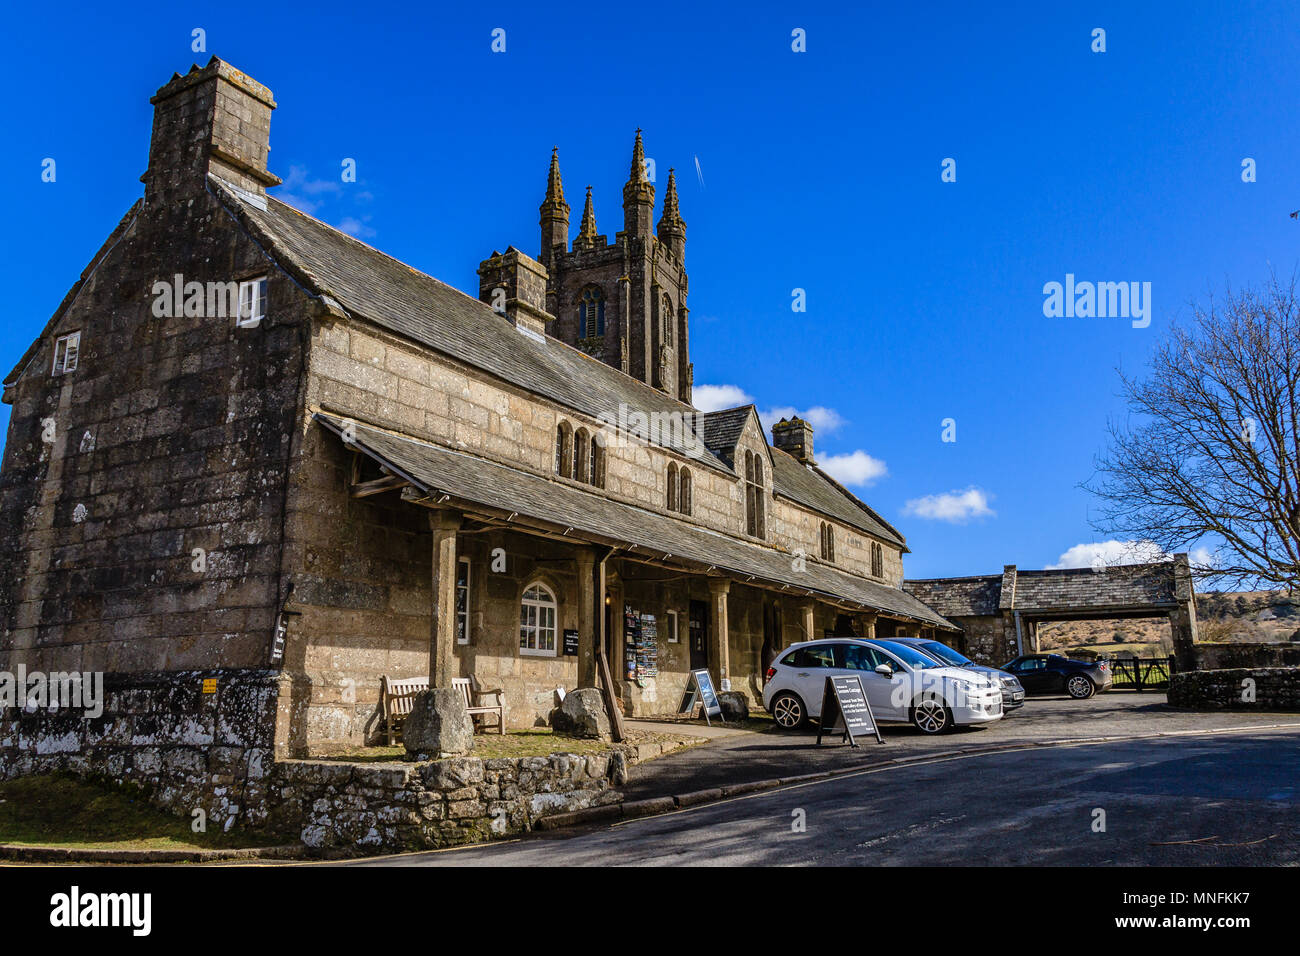 Street view of the Church House and church on a sunny day, Widecombe in the Moor, Dartmoor, Devon. March 2018. Stock Photo